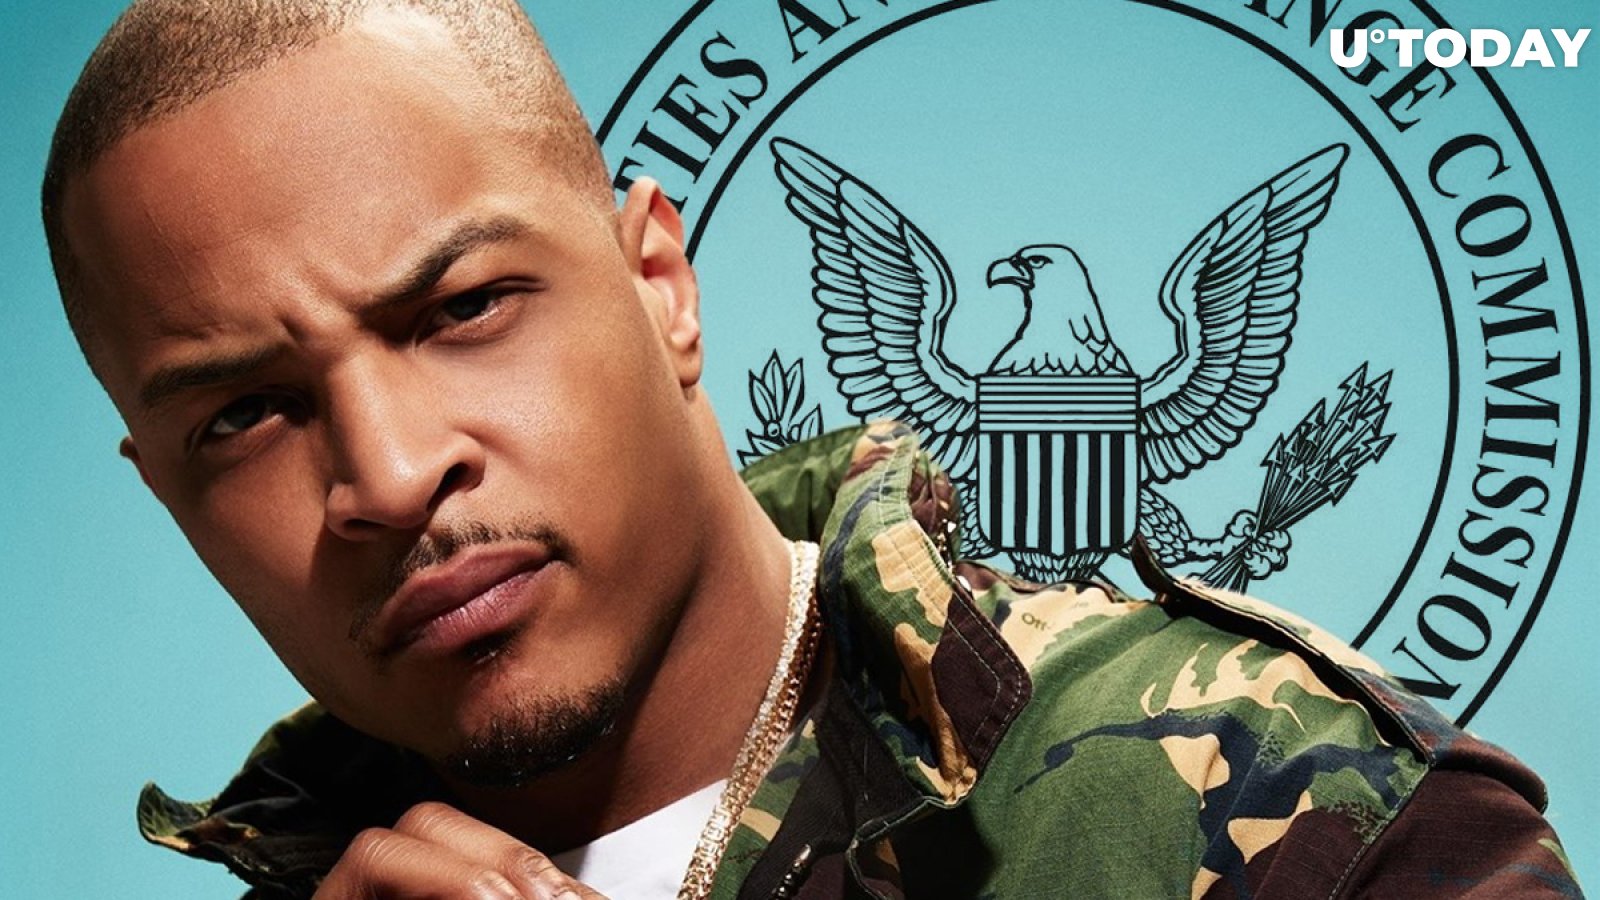 SEC Orders Rapper T.I. to Pay $75,000 Fine for Promoting ICO Fraud